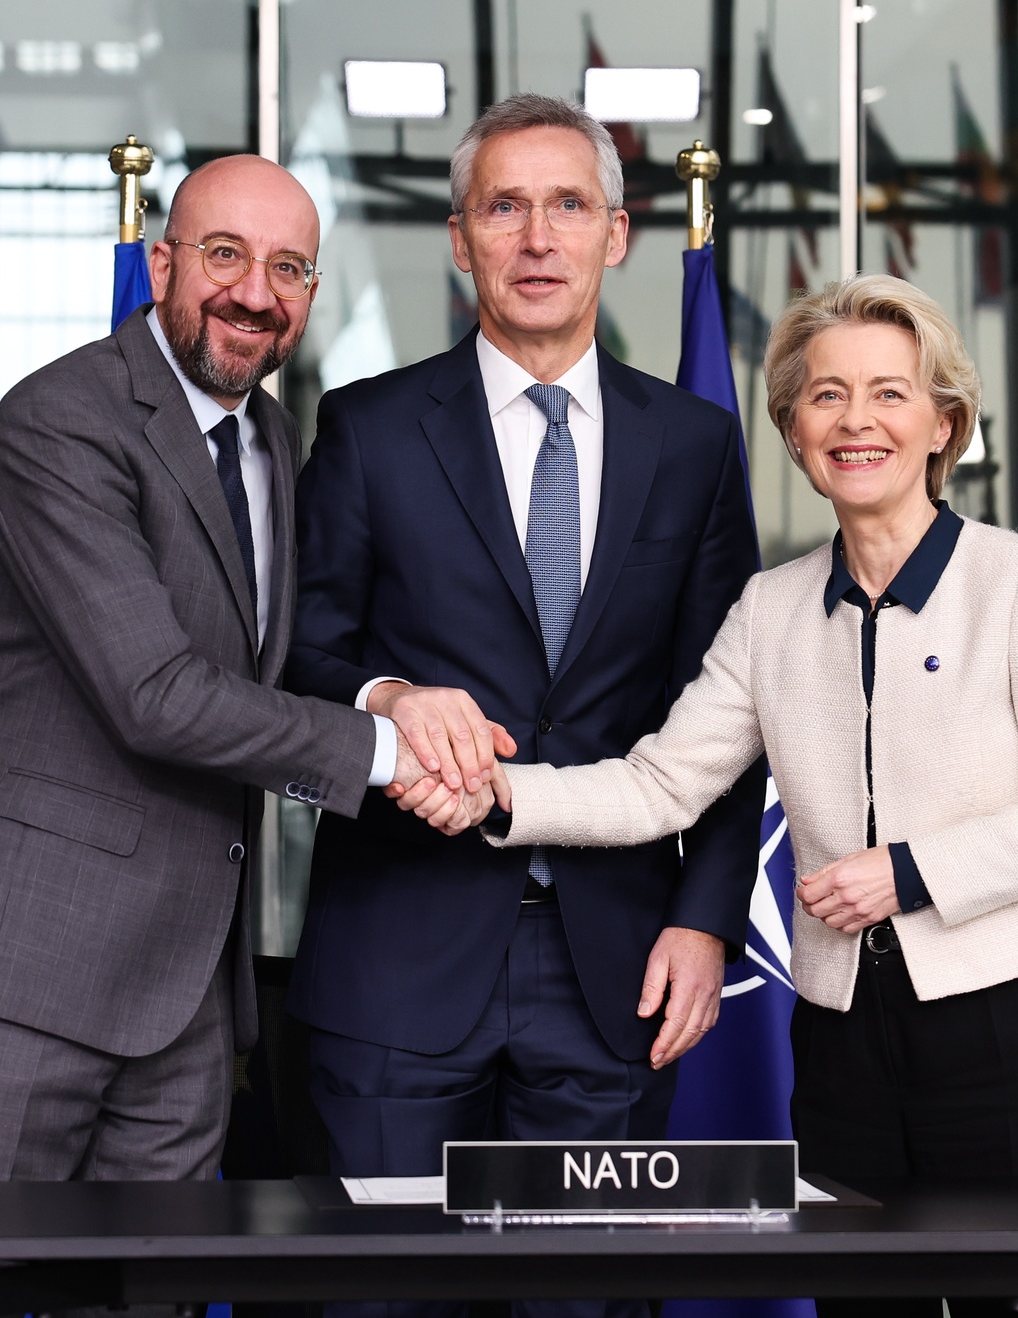 epa10397818 (L-R) European Council President Charles Michel, NATO Secretary General Jens Stoltenberg and European Commission President Ursula von der Leyen shake hands during the signing ceremony of the Joint Declaration on NATO-EU Cooperation at the Alliance headquarters in Brussels, Belgium, 10 January 2023.  EPA/STEPHANIE LECOCQ